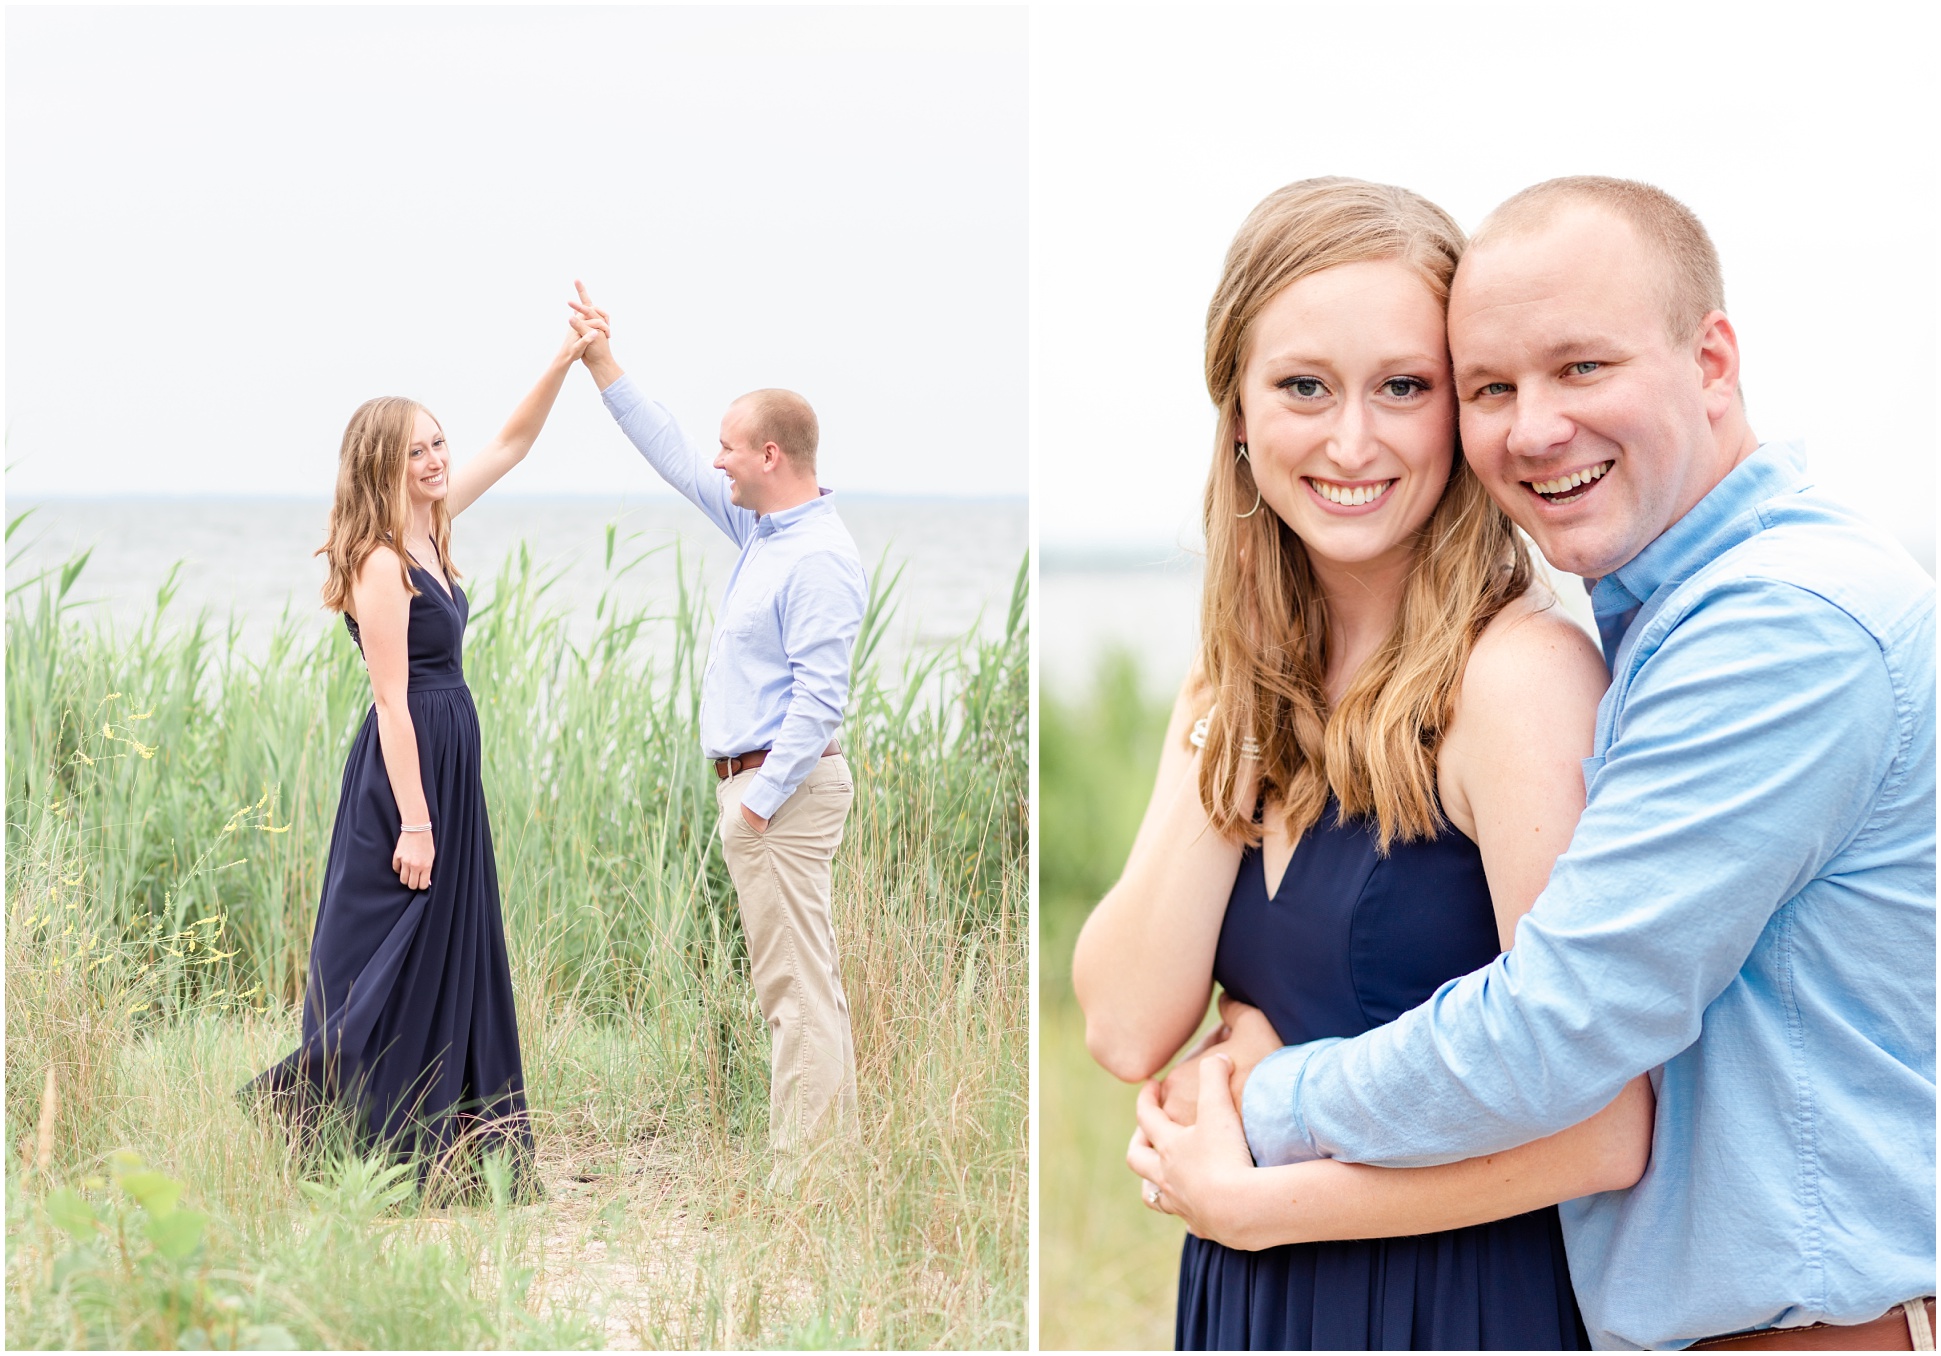 Bride-To-Be Twirling with her groom, right Image: Bride and groom nuzzling together in the tall grasses